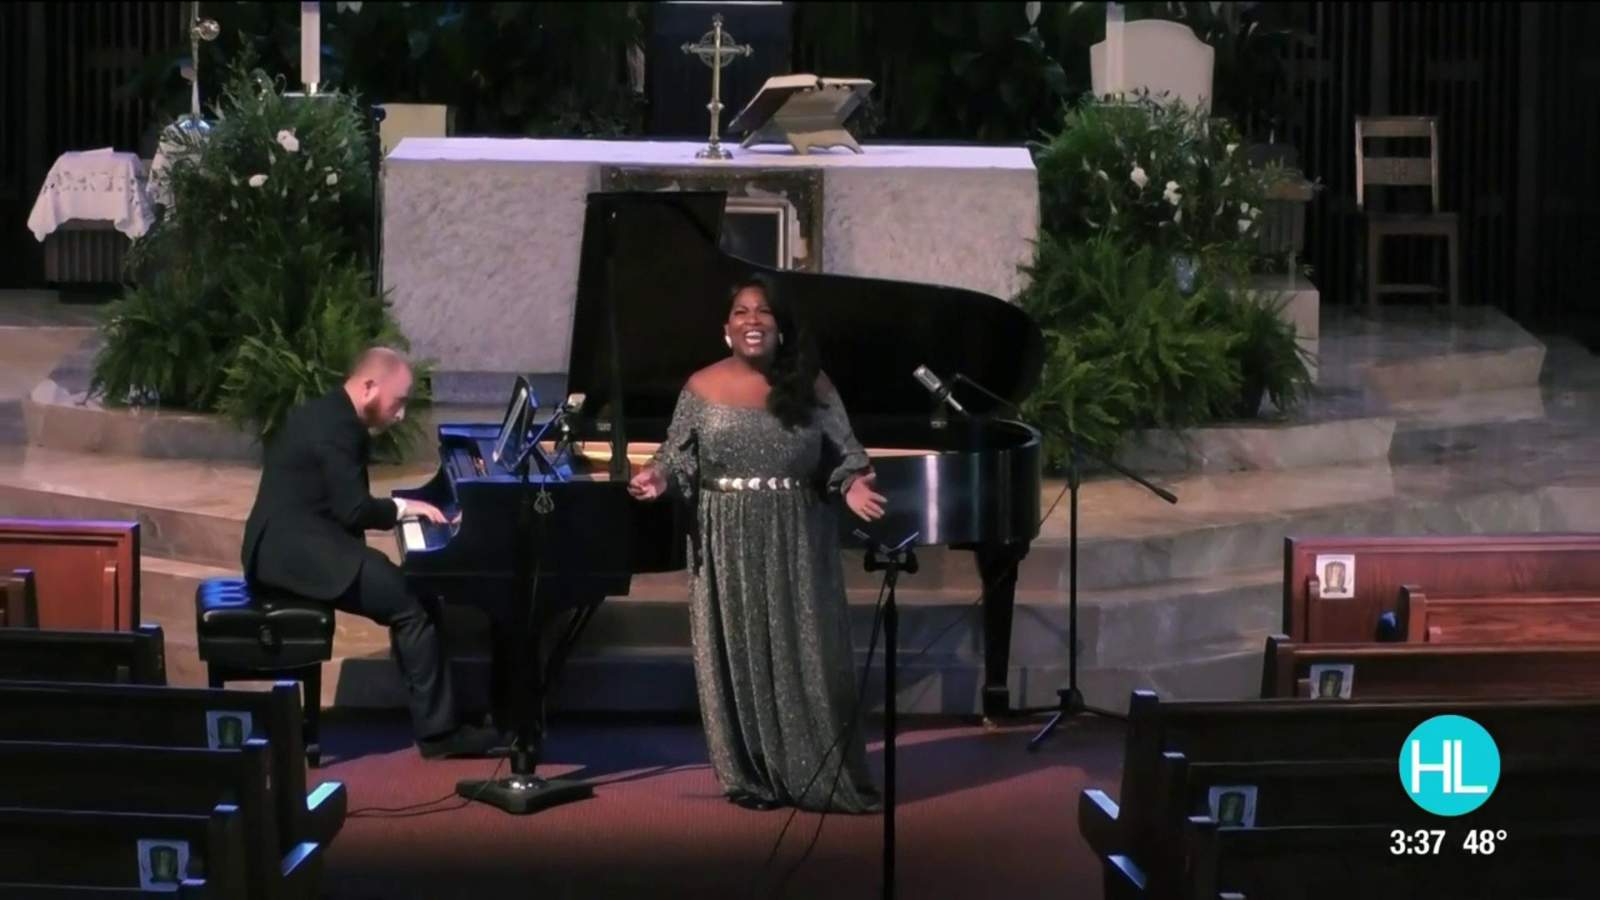 Houston’s Ebony Opera Guild continues long standing legacy developing African American singers